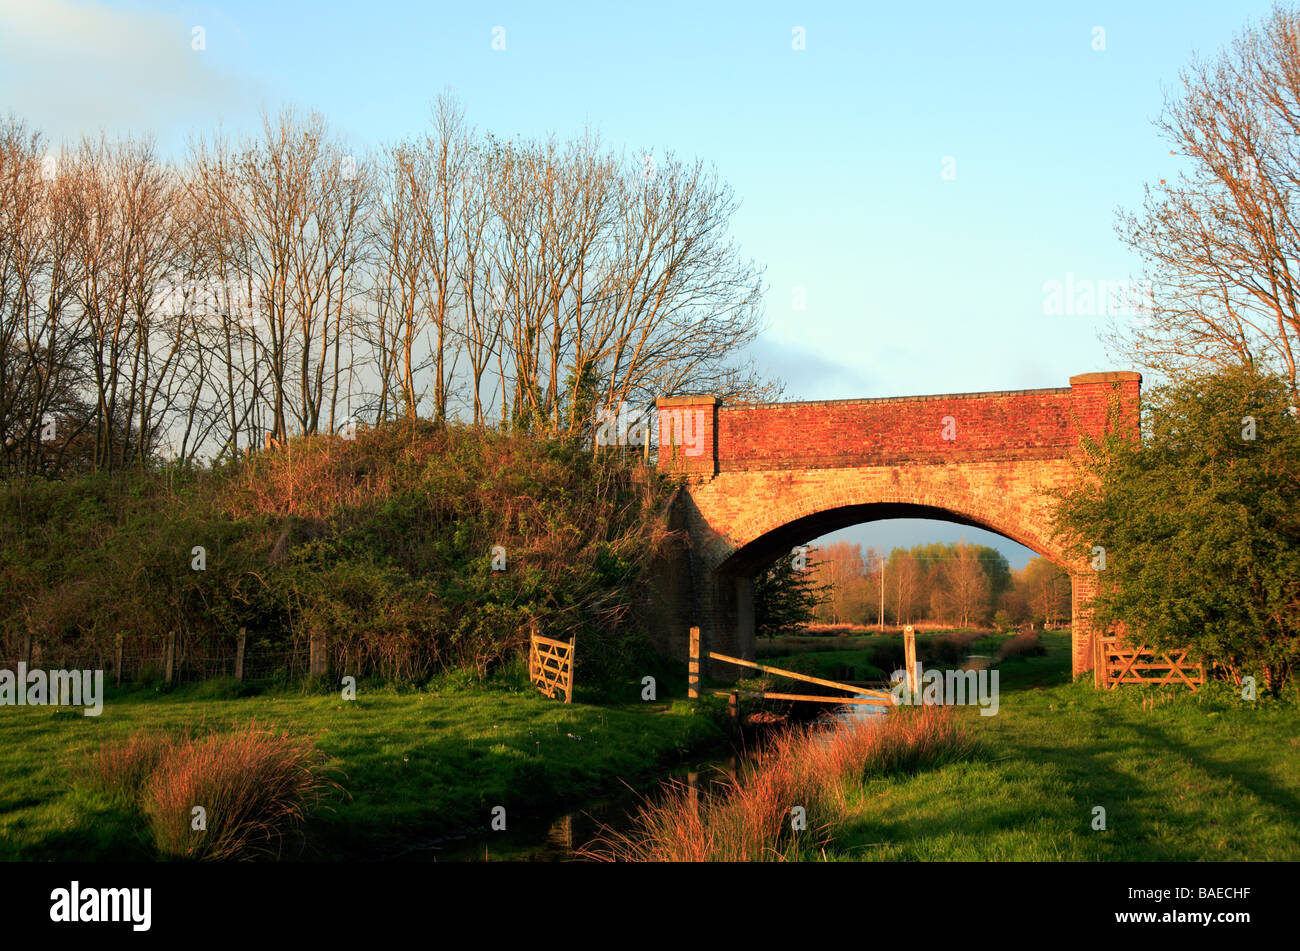 A railway bridge supporting the Bure Valley Railway and walk over the Mermaid stream in evening light. Stock Photo